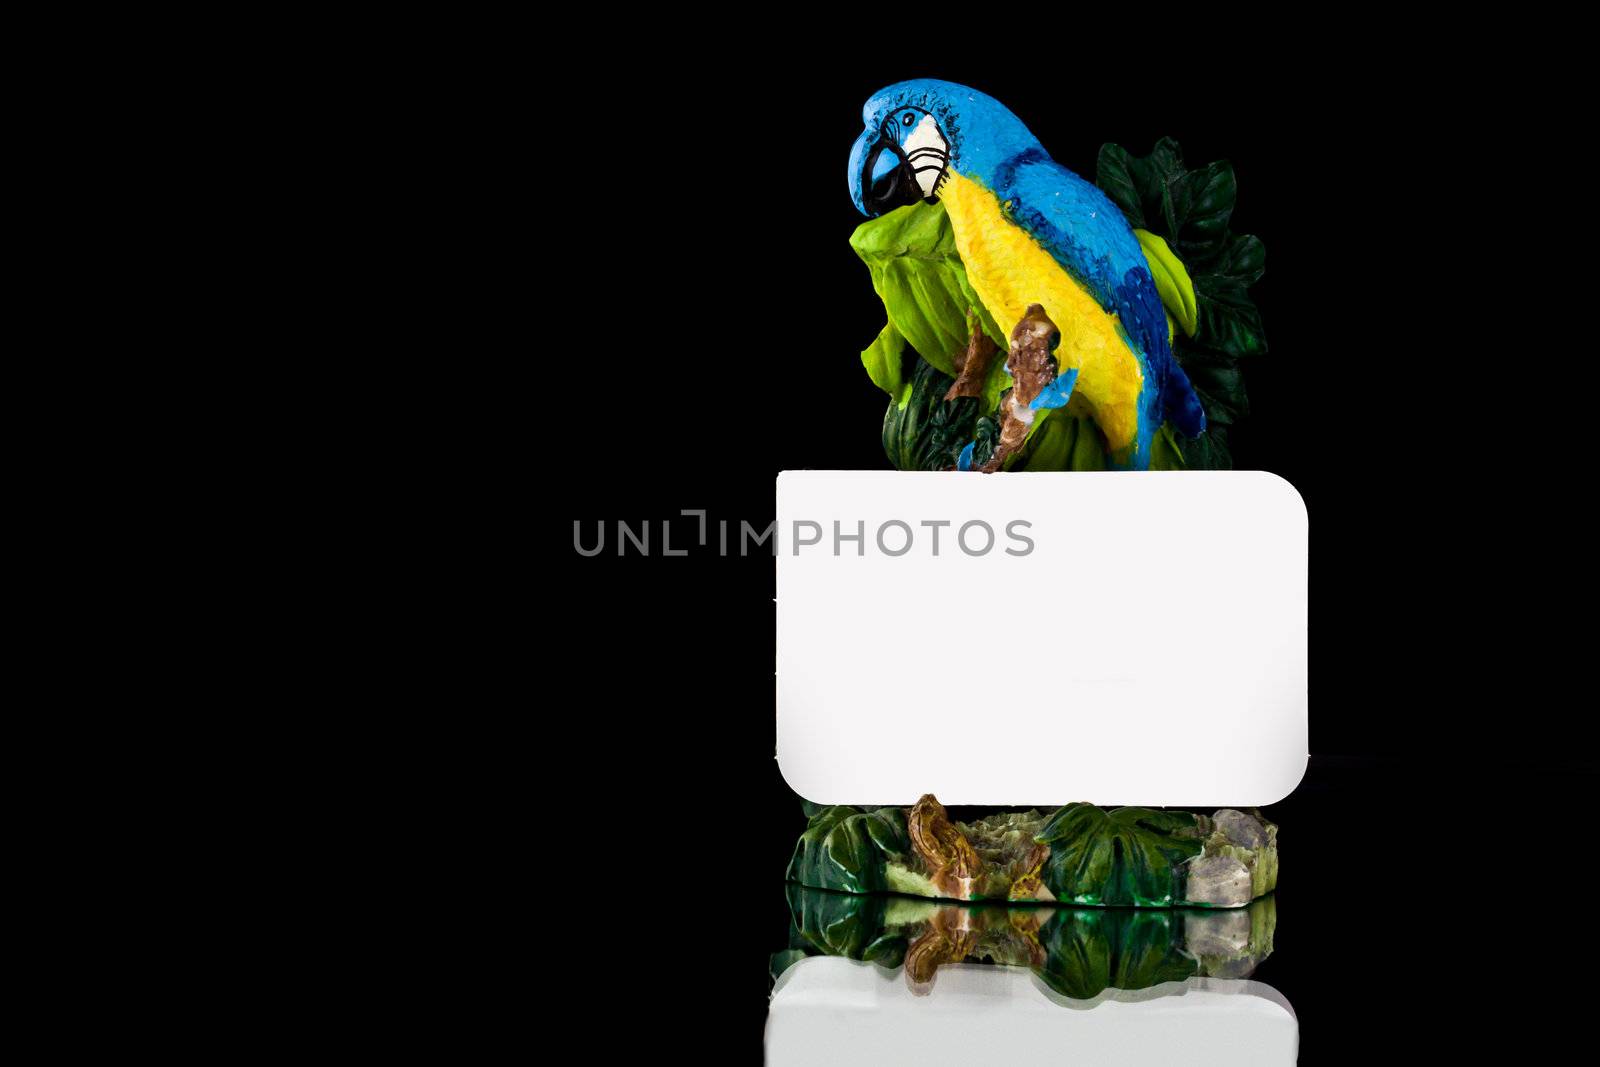 Close up picture of a parrot statue with a note 